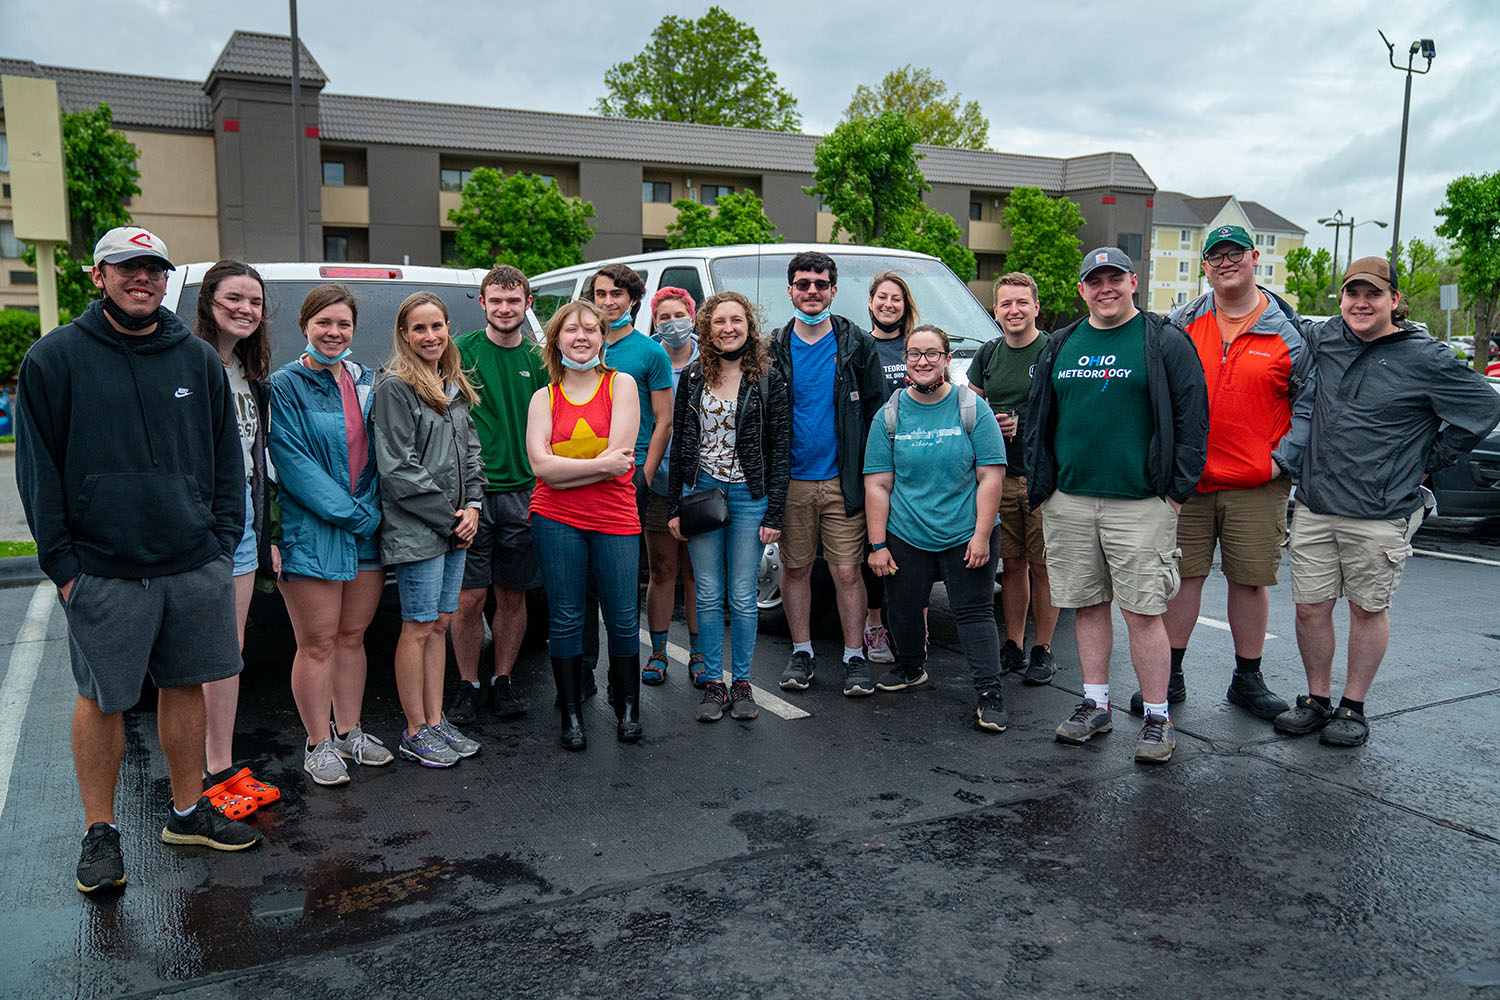 A total of 15 students went on the trip, including 13 undergraduate students ranging from first years to graduating seniors and two graduate students. From left to right:  Adam Eckman, Ashlee Ziegler, Emily Dietz, Dr. Jana Houser, Elijah Paciorek, Lauren Warner, James Zinnbauer, Hunter Uhl, Eden Koval, Nathan Kuhr, Darby Johnson, Sydney Walters, Chris Ford, Jacob Van Cleave, Cameron Cusino and Colby Bryan.